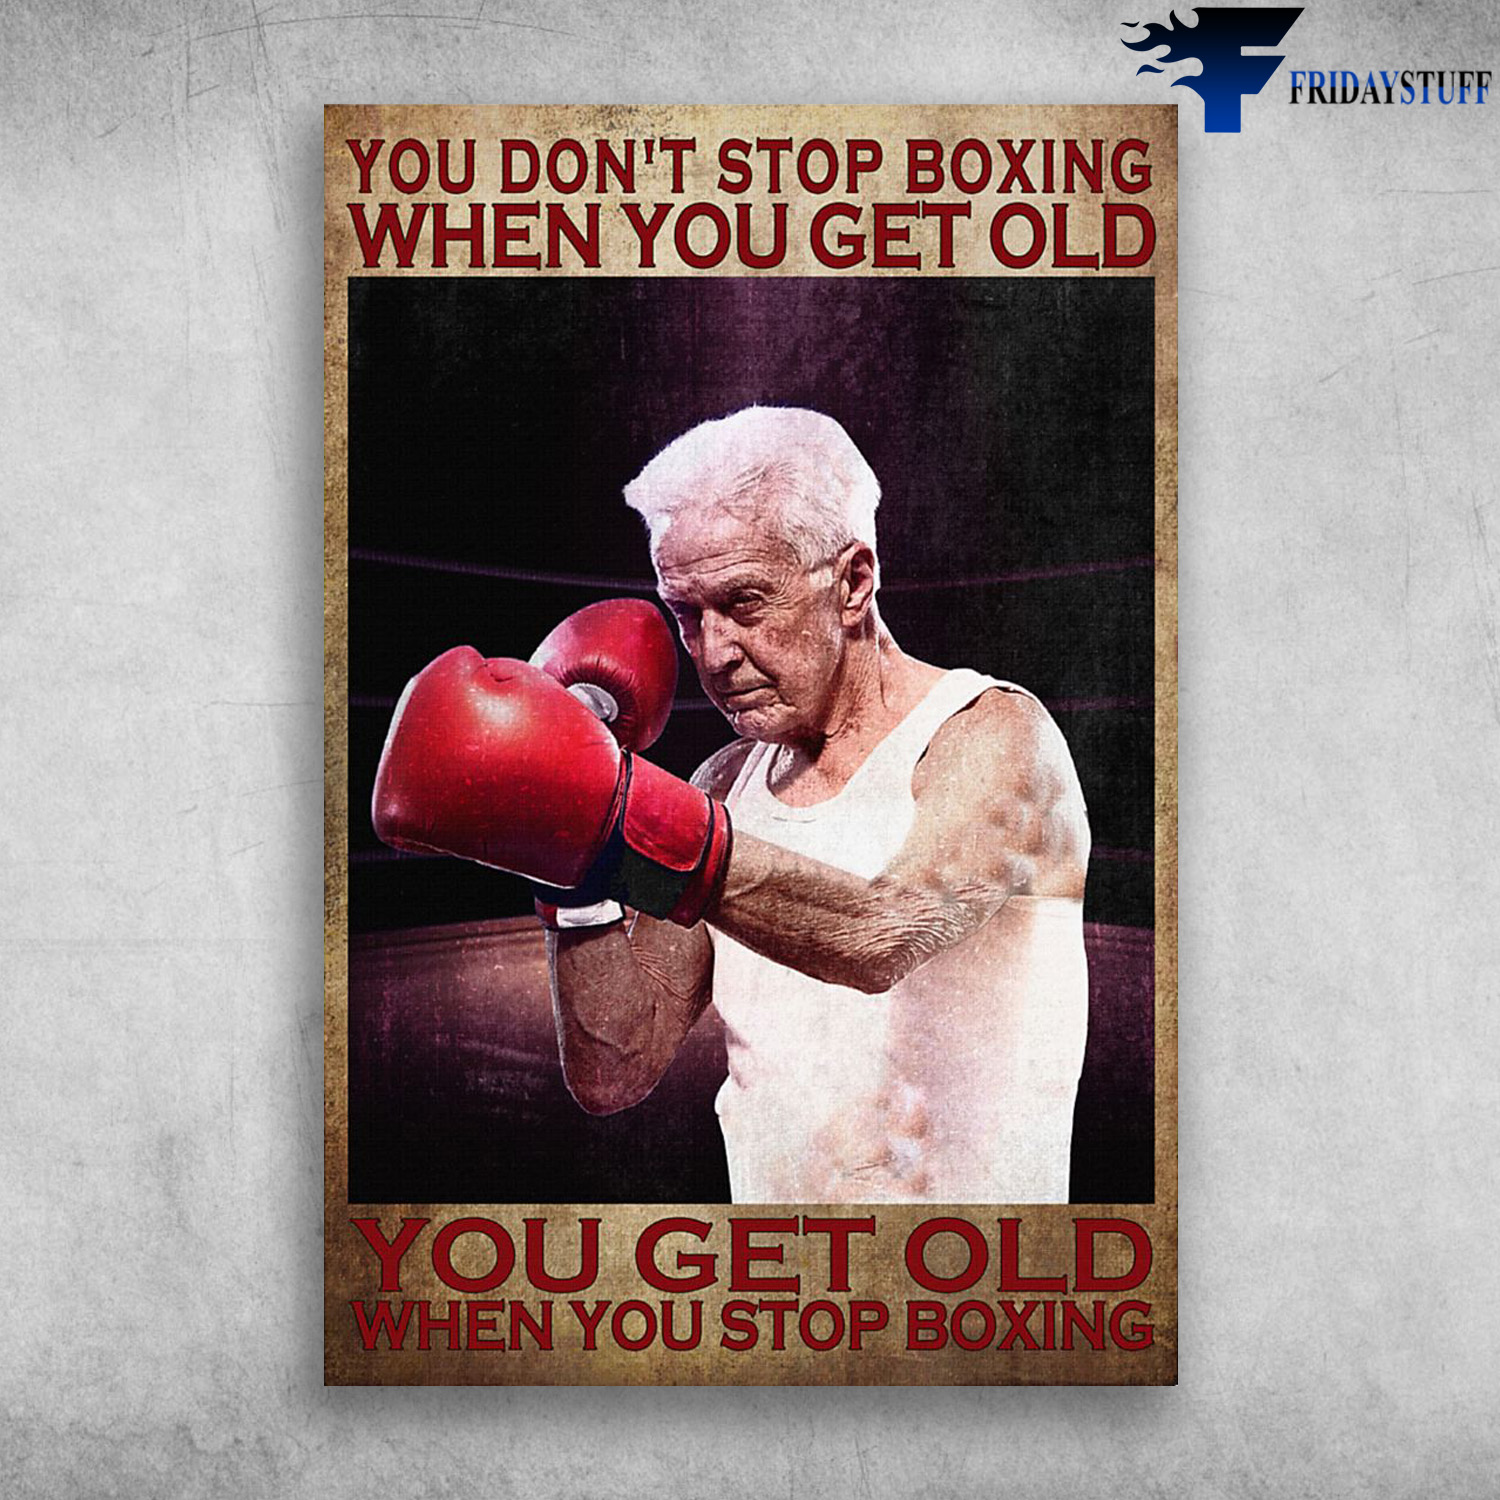 Old Man Boxing - You Don't Stop Boxing When You Get Old, You Get Old When You Stop Boxing